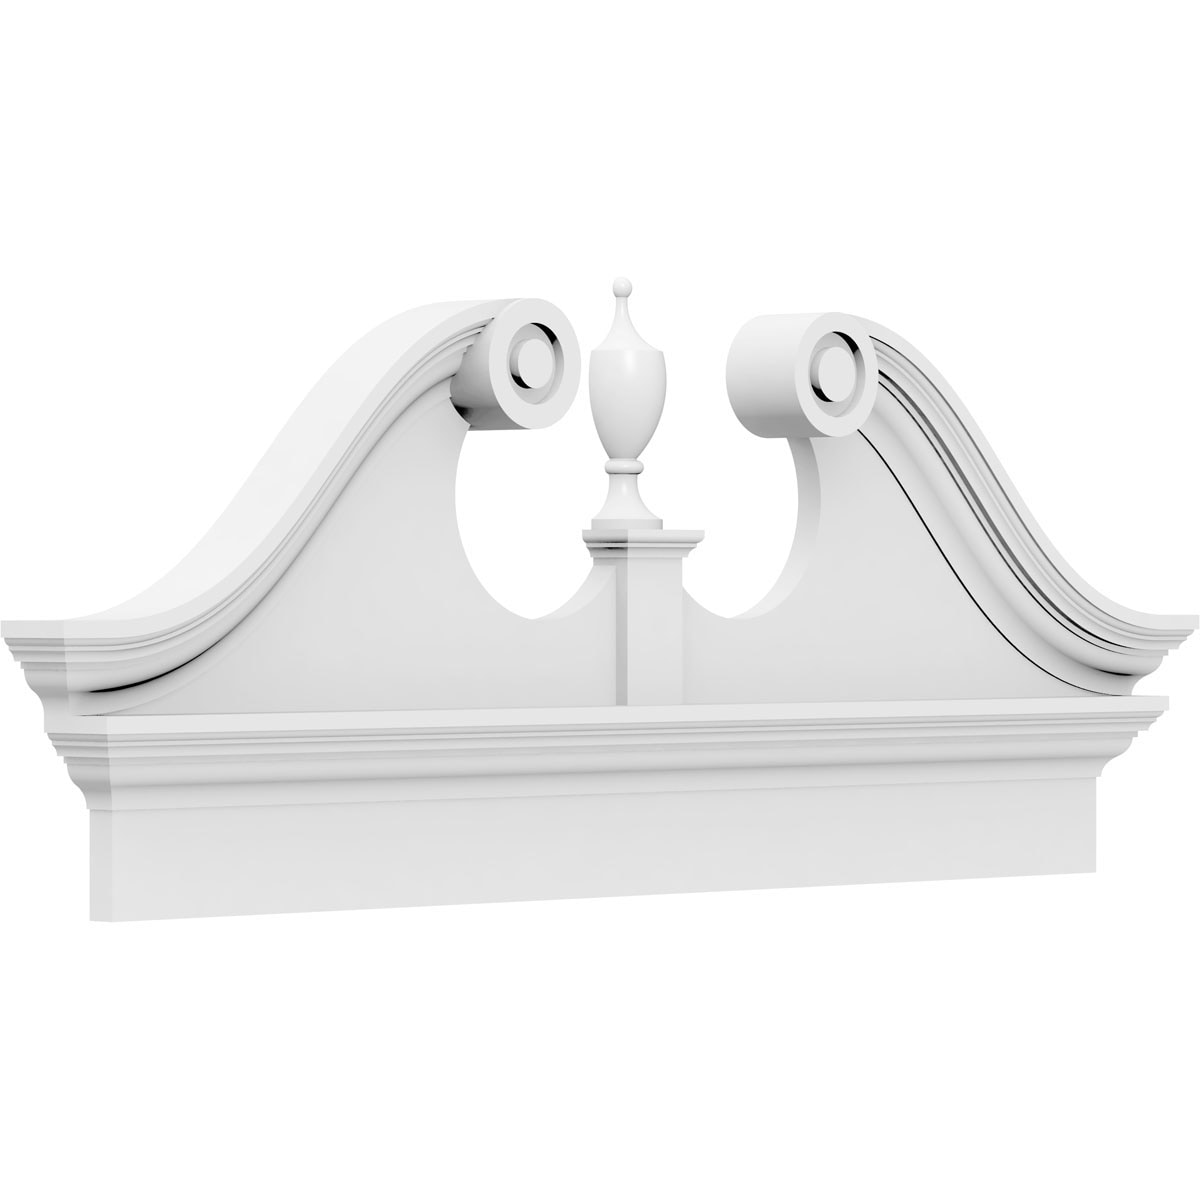 Ekena Millwork Rams Head 54-in x 20-3/8-in Unfinished PVC Pediment Entry Door Casing Accent in White | PEDPC054X205RHP00